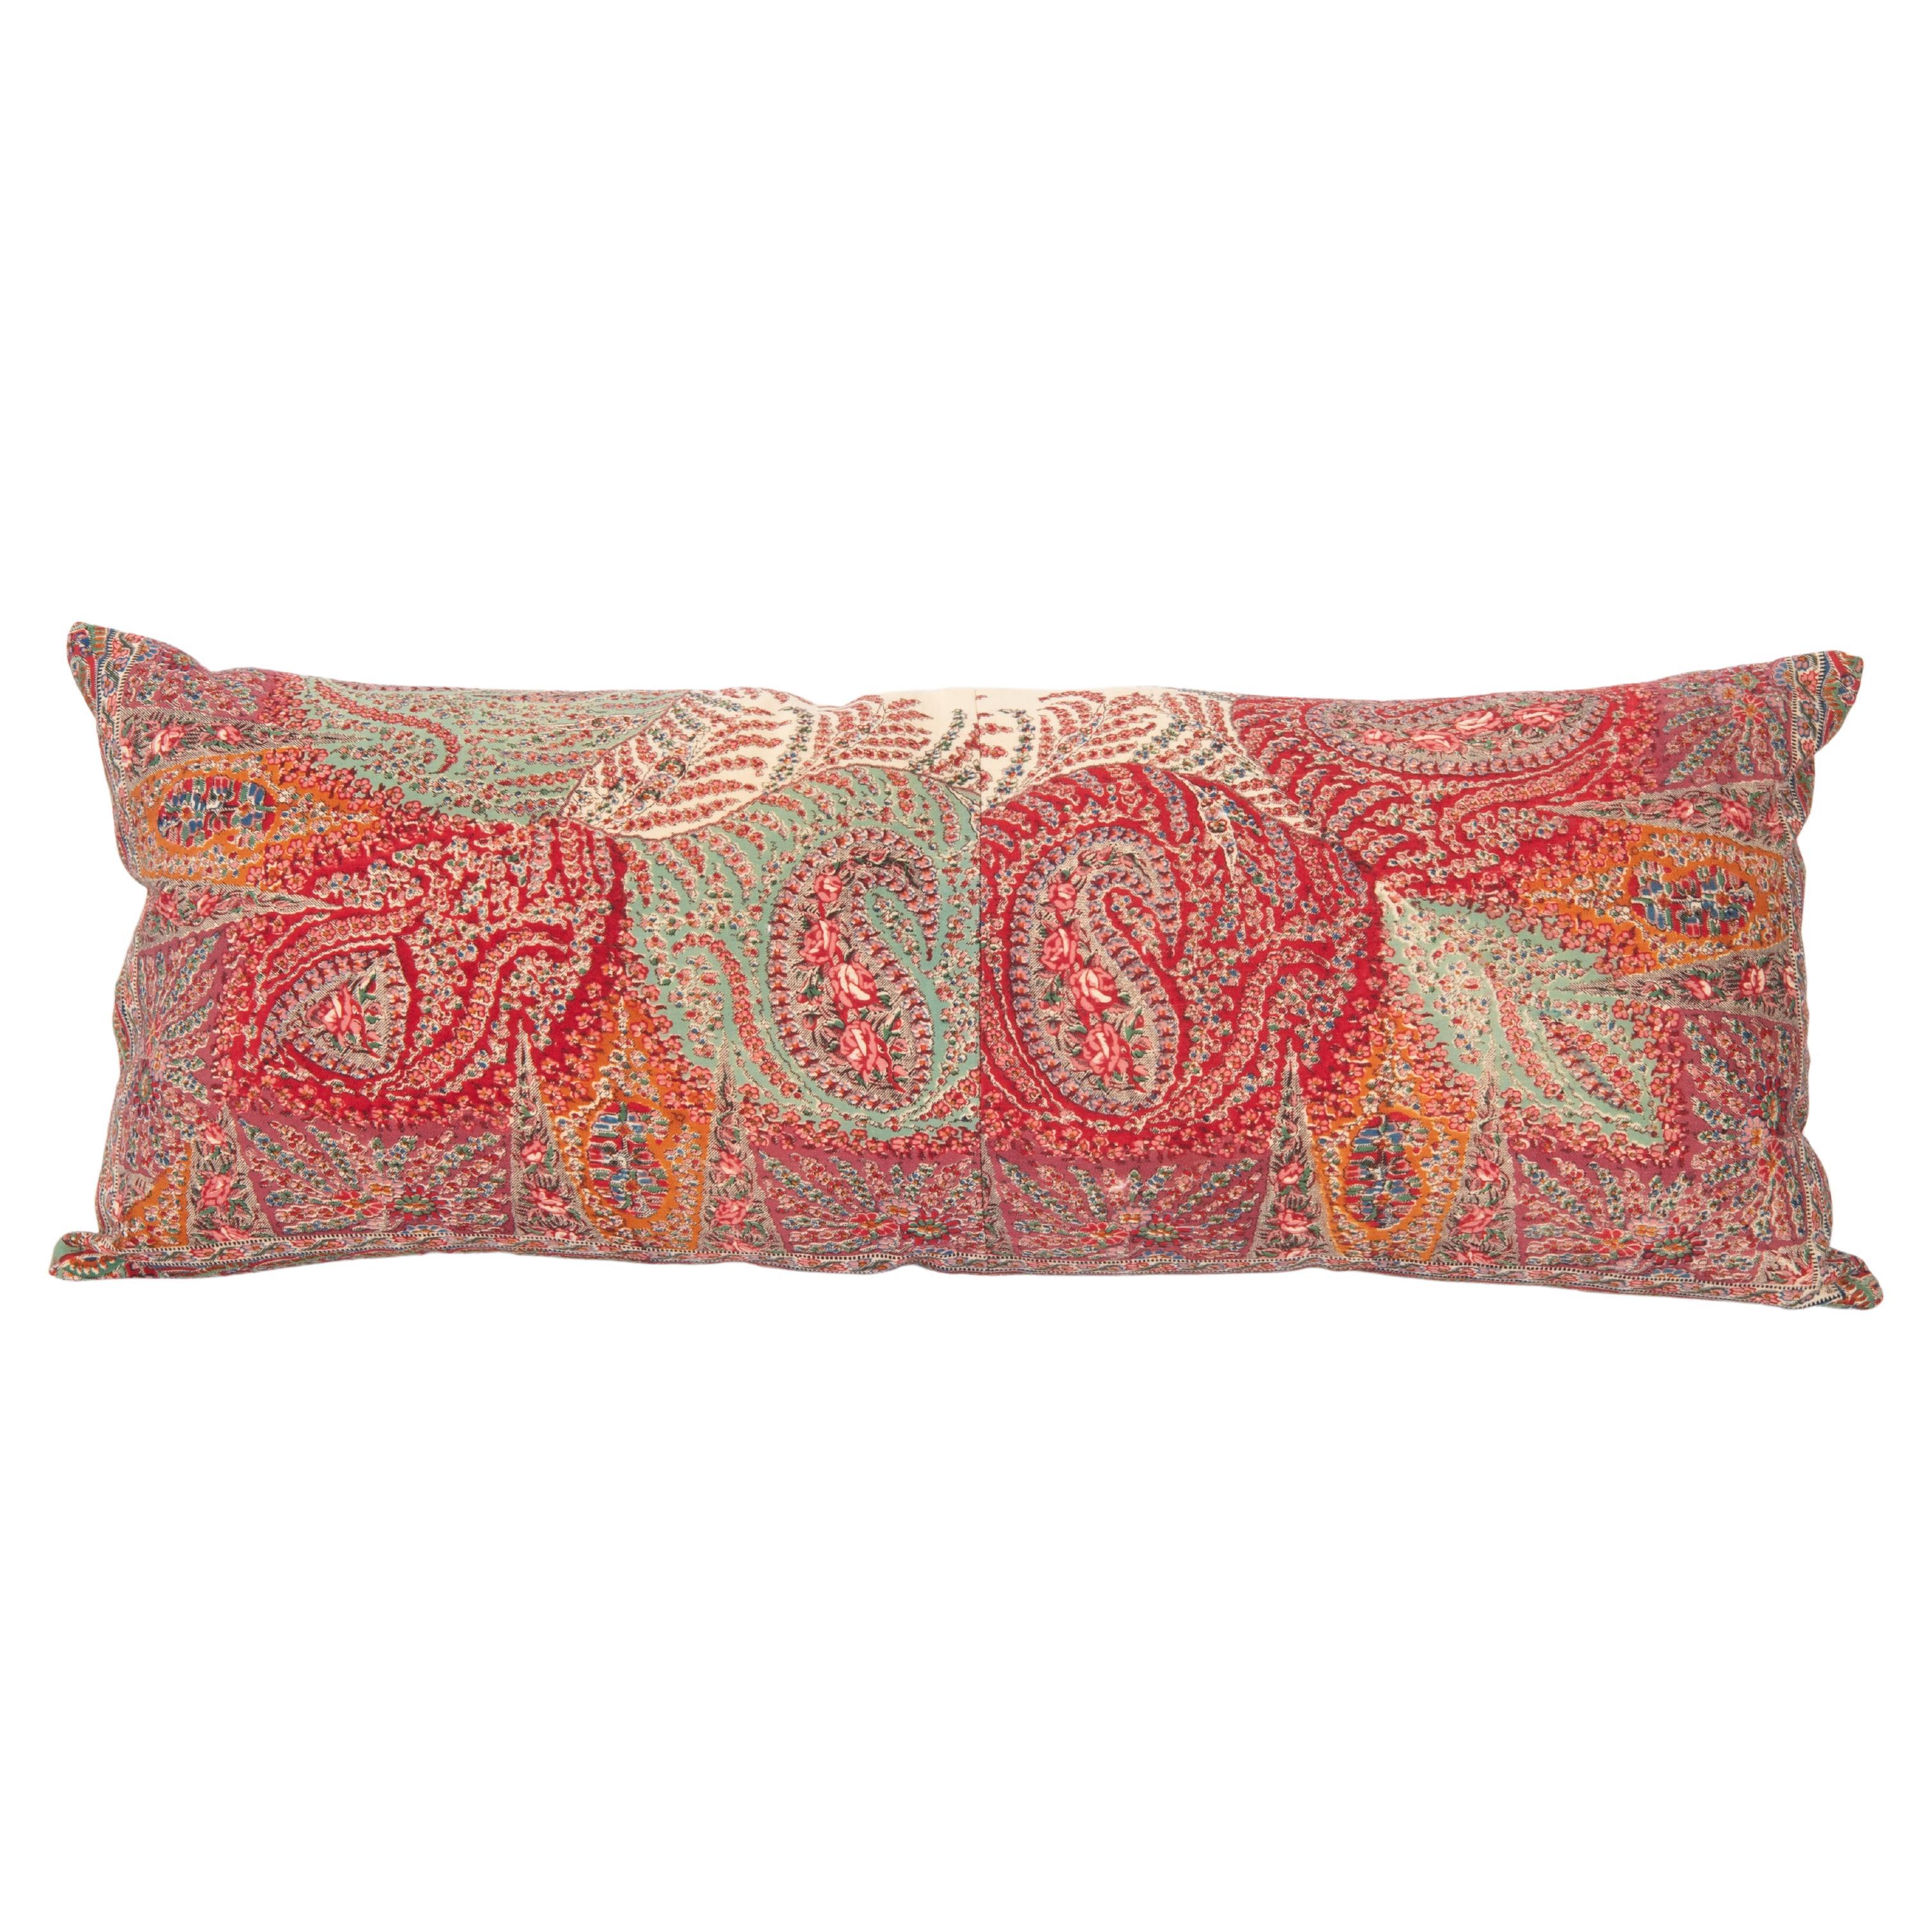 Pillow Cover Made from an English Printed Shawl, 19th C. For Sale